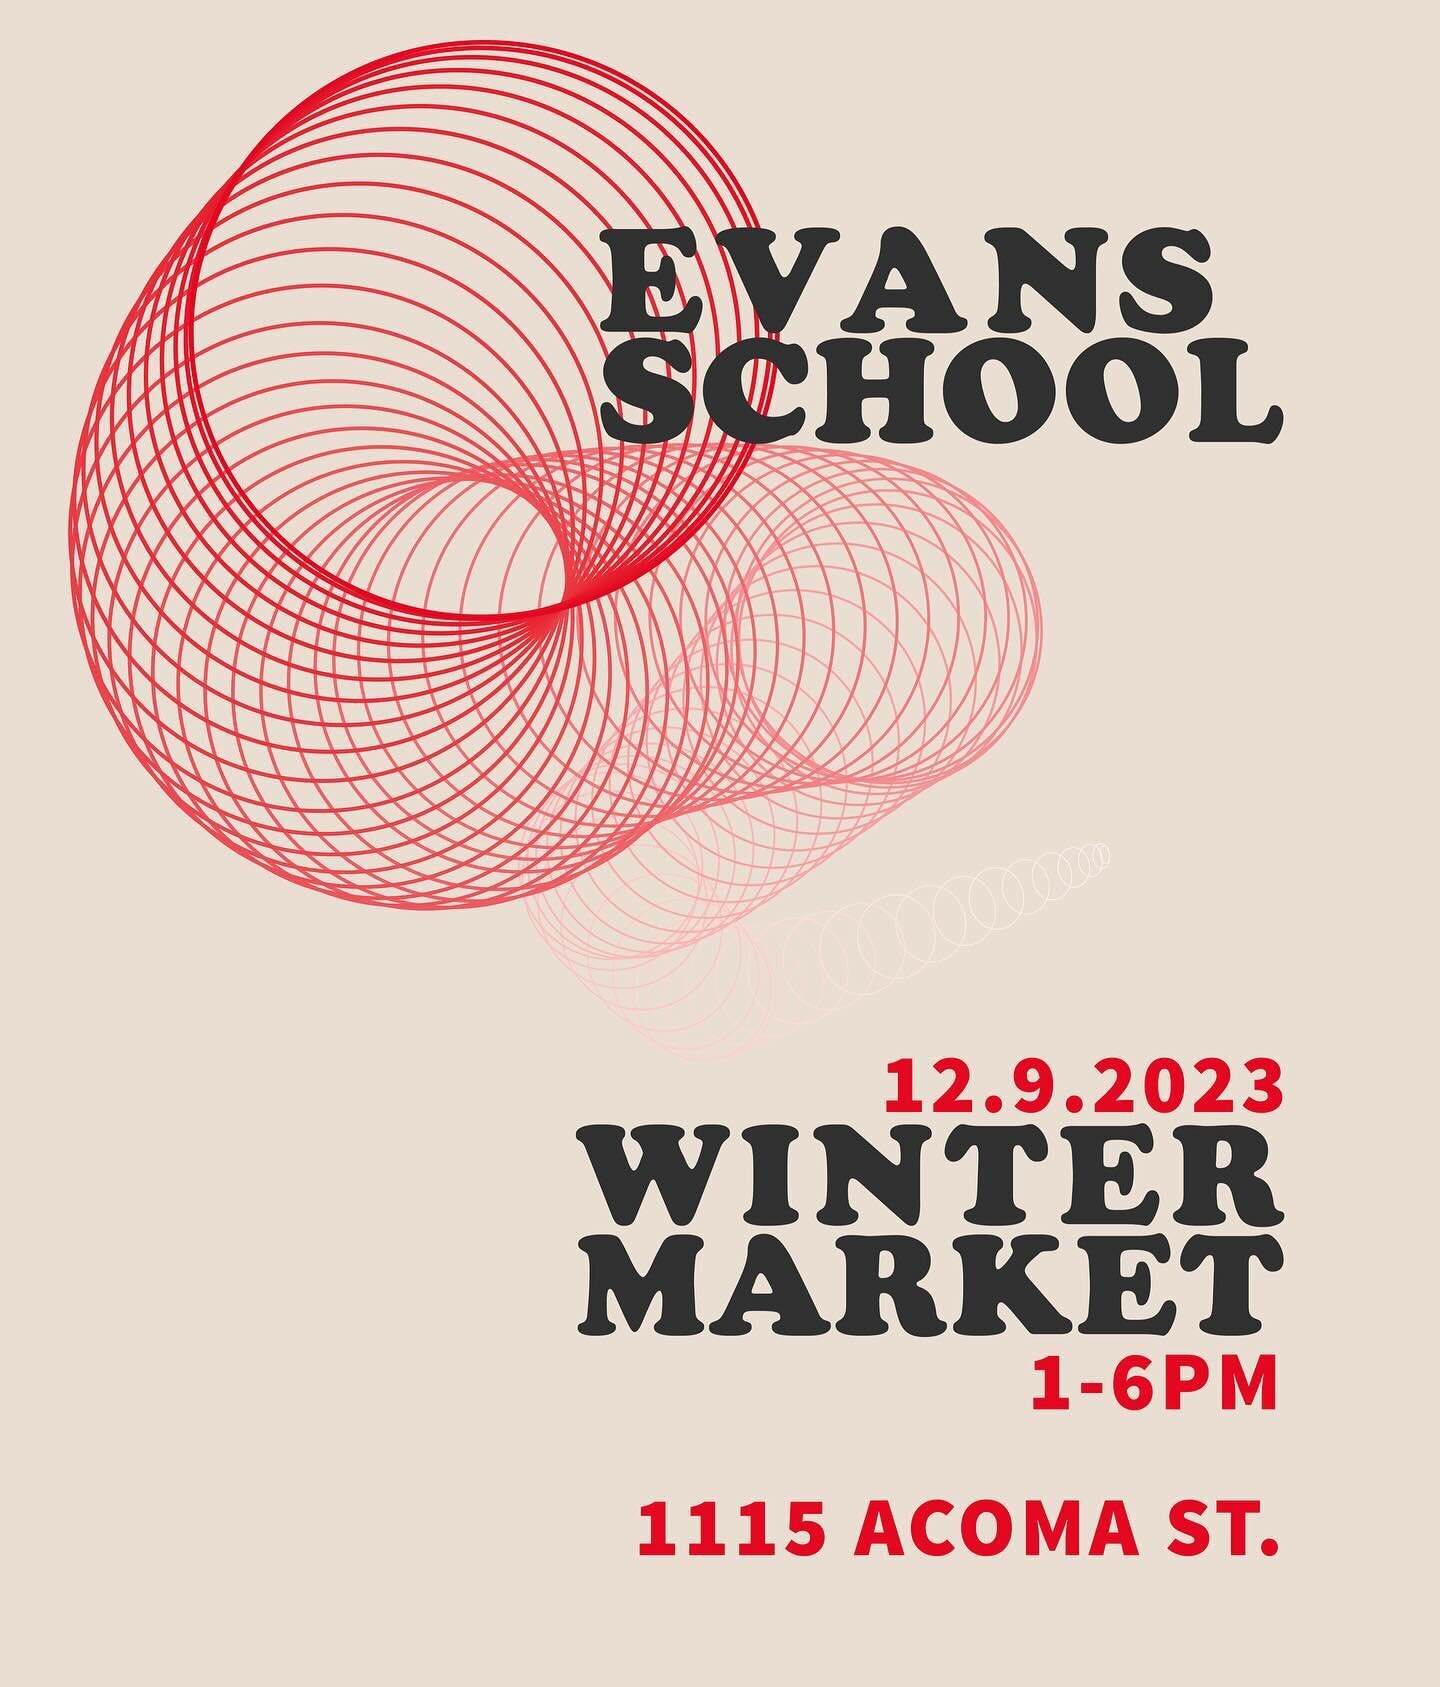 Join us for the 2023 Evans School Winter Market next Saturday!

Saturday, December 9th from 1 - 6pm
The Evans School
@denverevansschool 
1115 Acoma Street, Denver, 80204

Visitors will be able to explore the building and see how artists have transfor